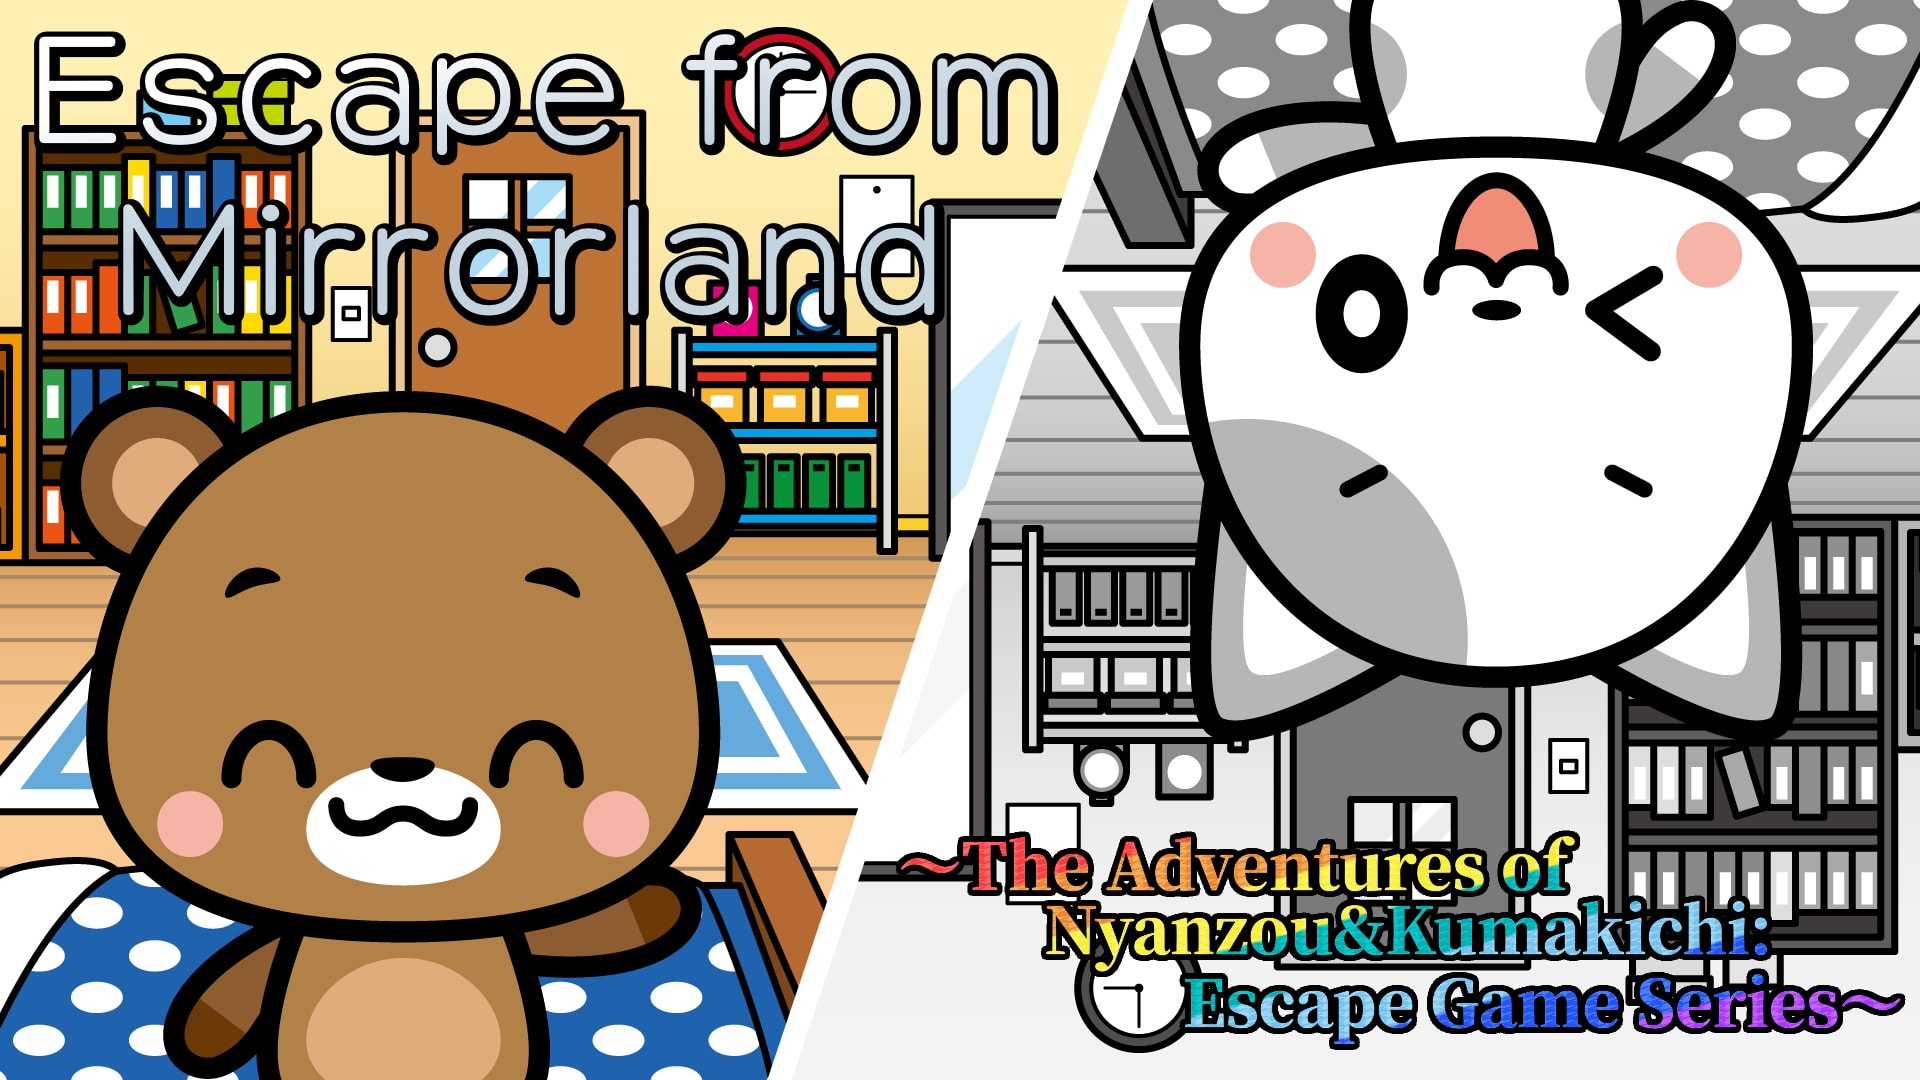 Escape from Mirrorland
～The Adventures of Nyanzou&Kumakichi: Escape Game Series～